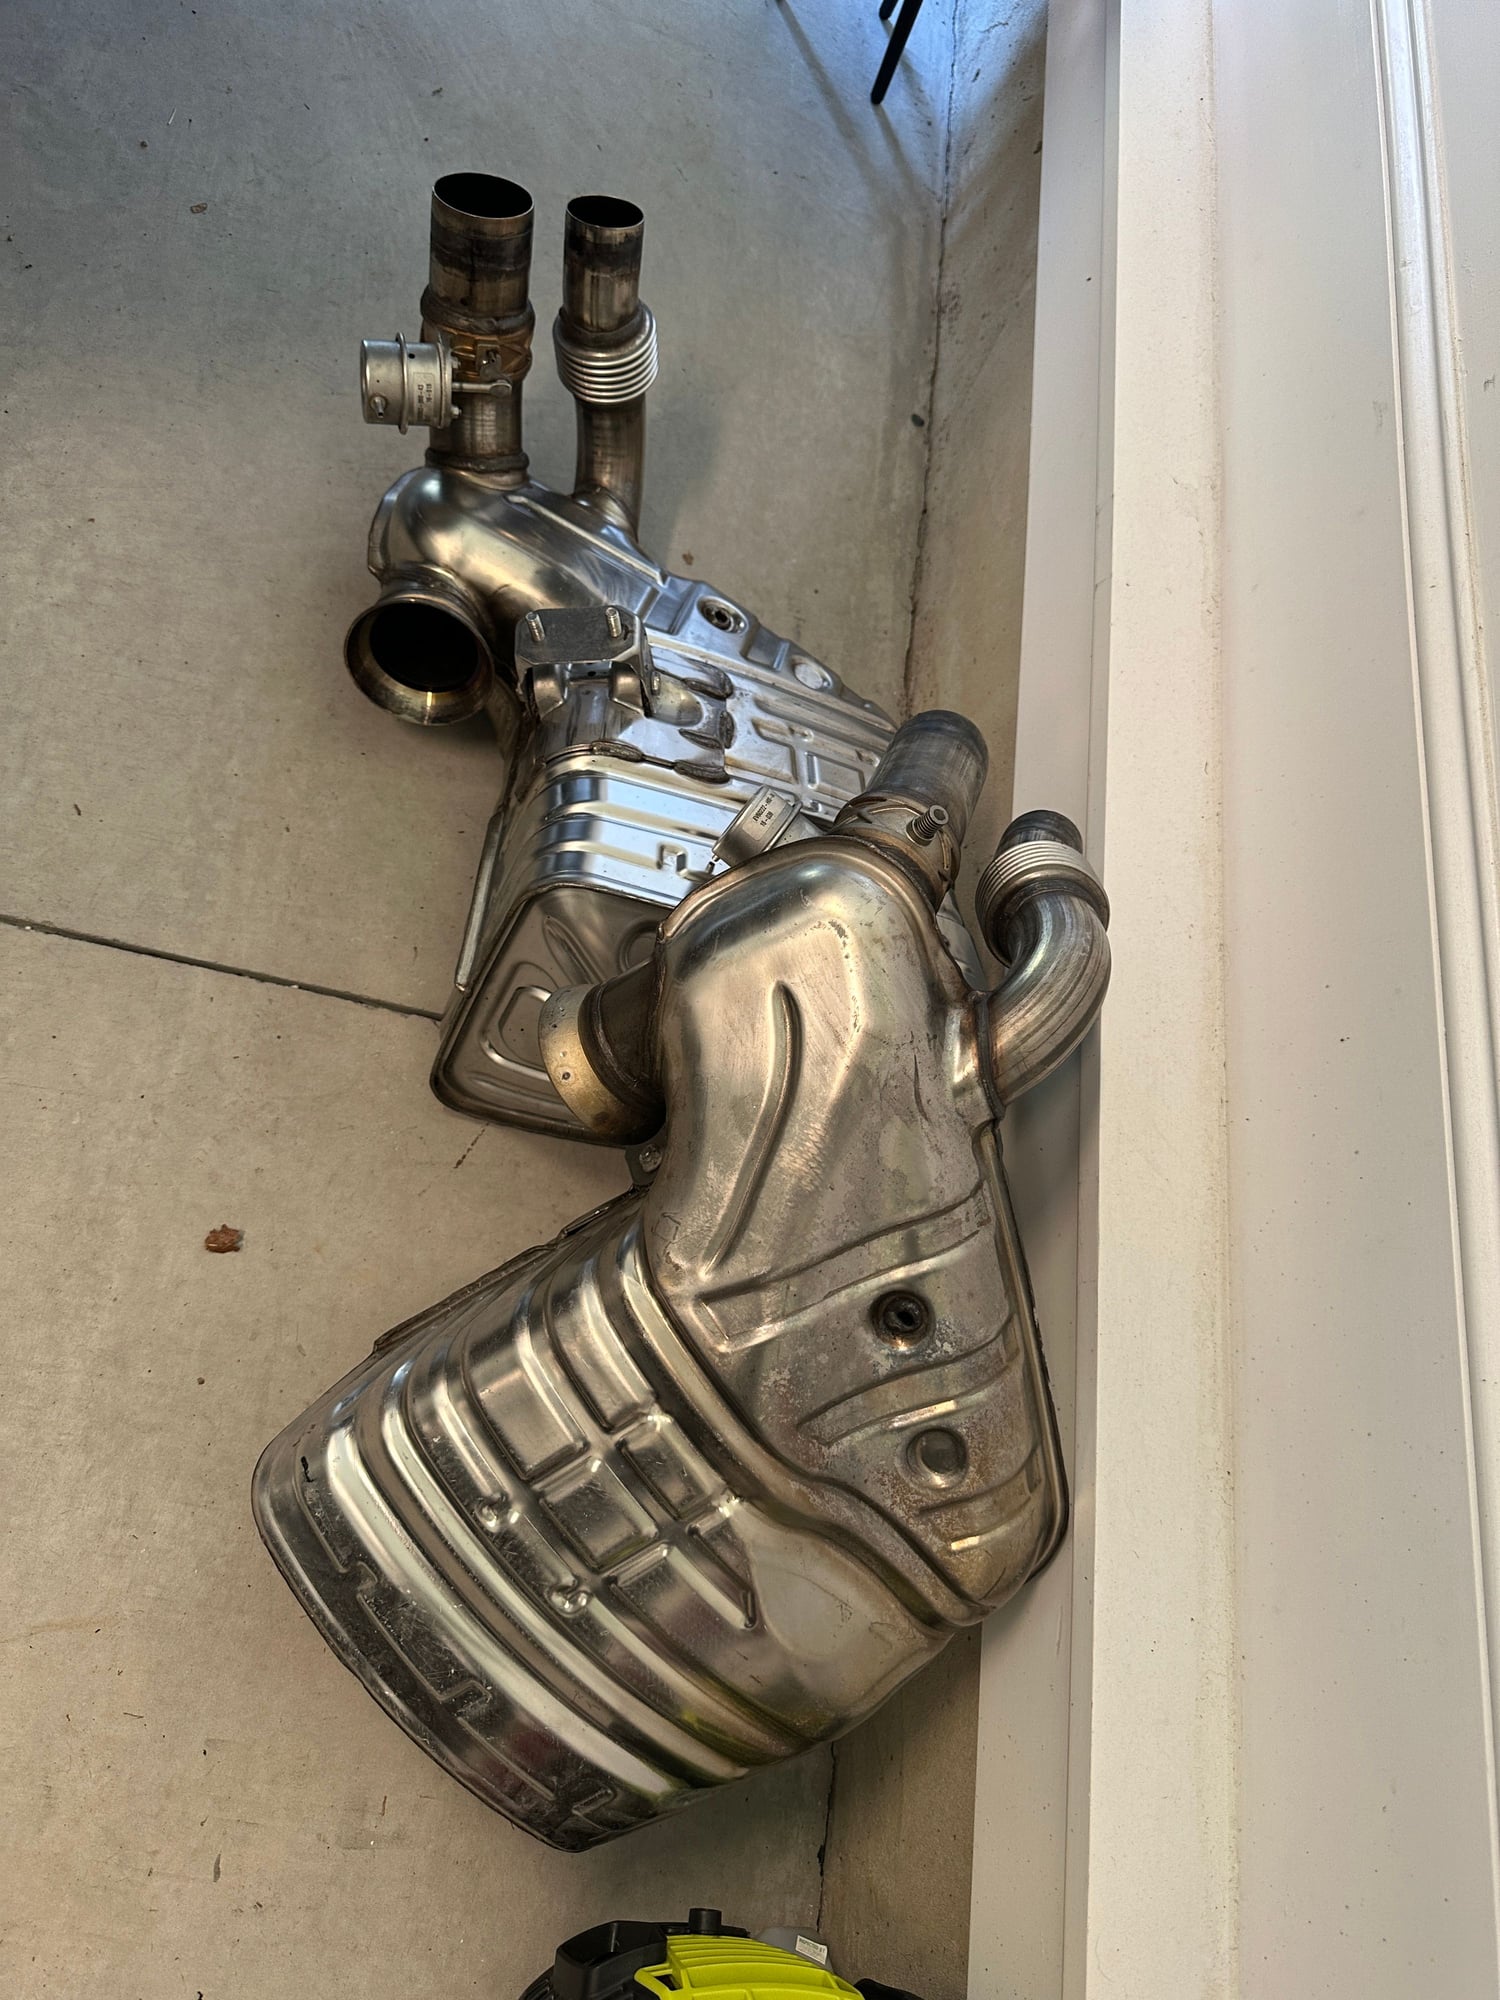 Engine - Exhaust - 991 GT3RS Mufflers (corner cans) - Used - 2016 to 2019 Porsche 911 - Charlotte, NC 28211, United States